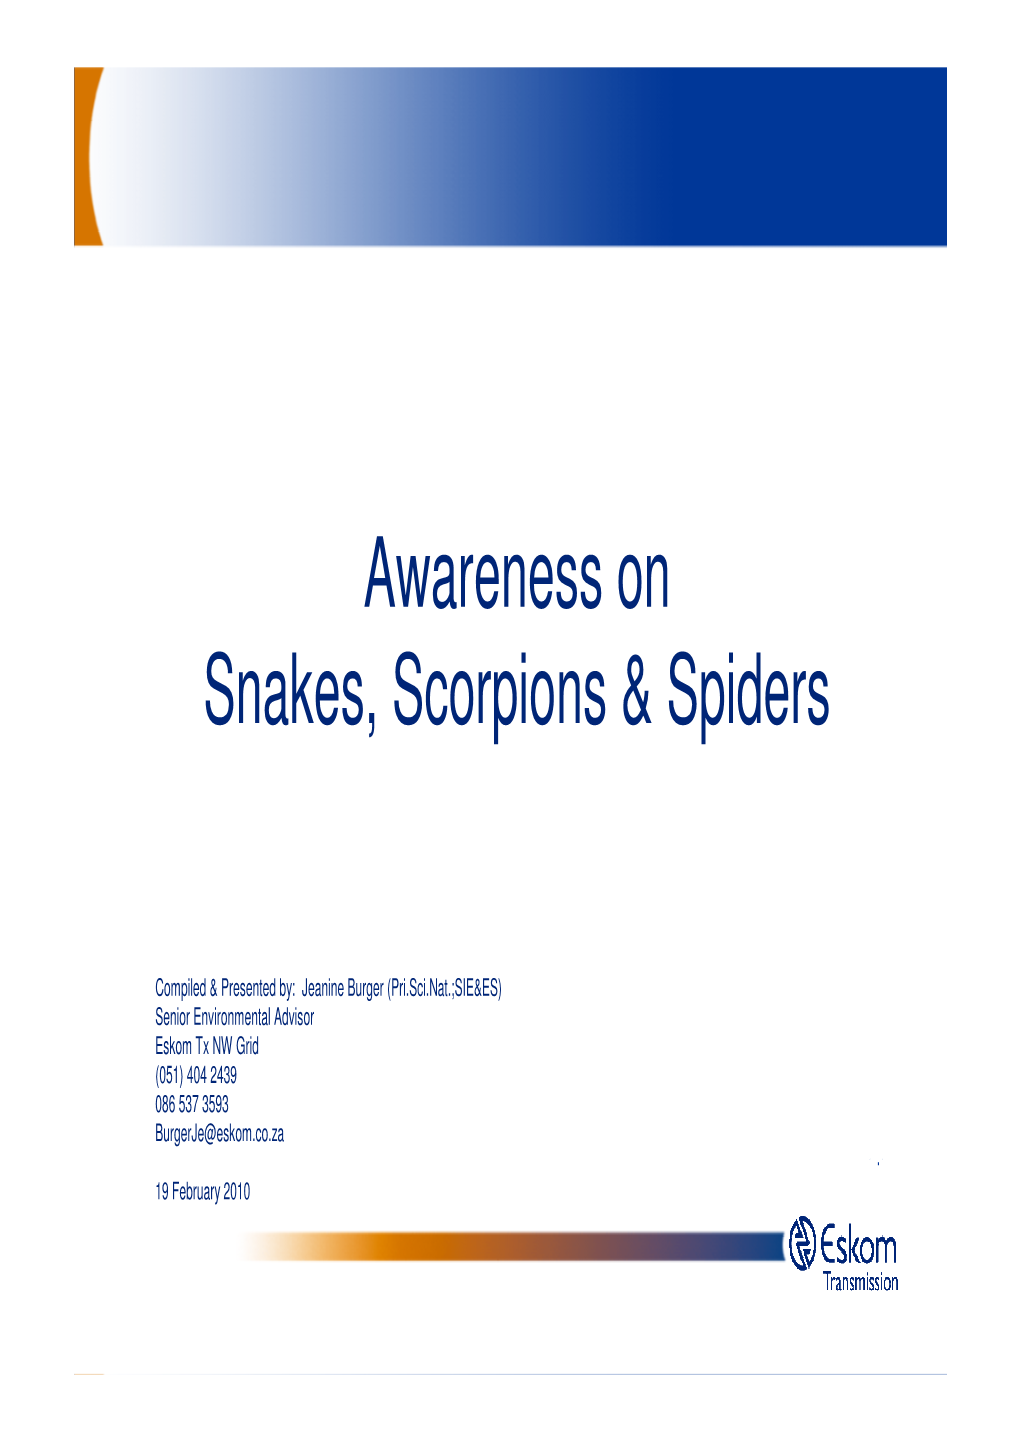 Awareness on Snakes, Scorpions & Spiders